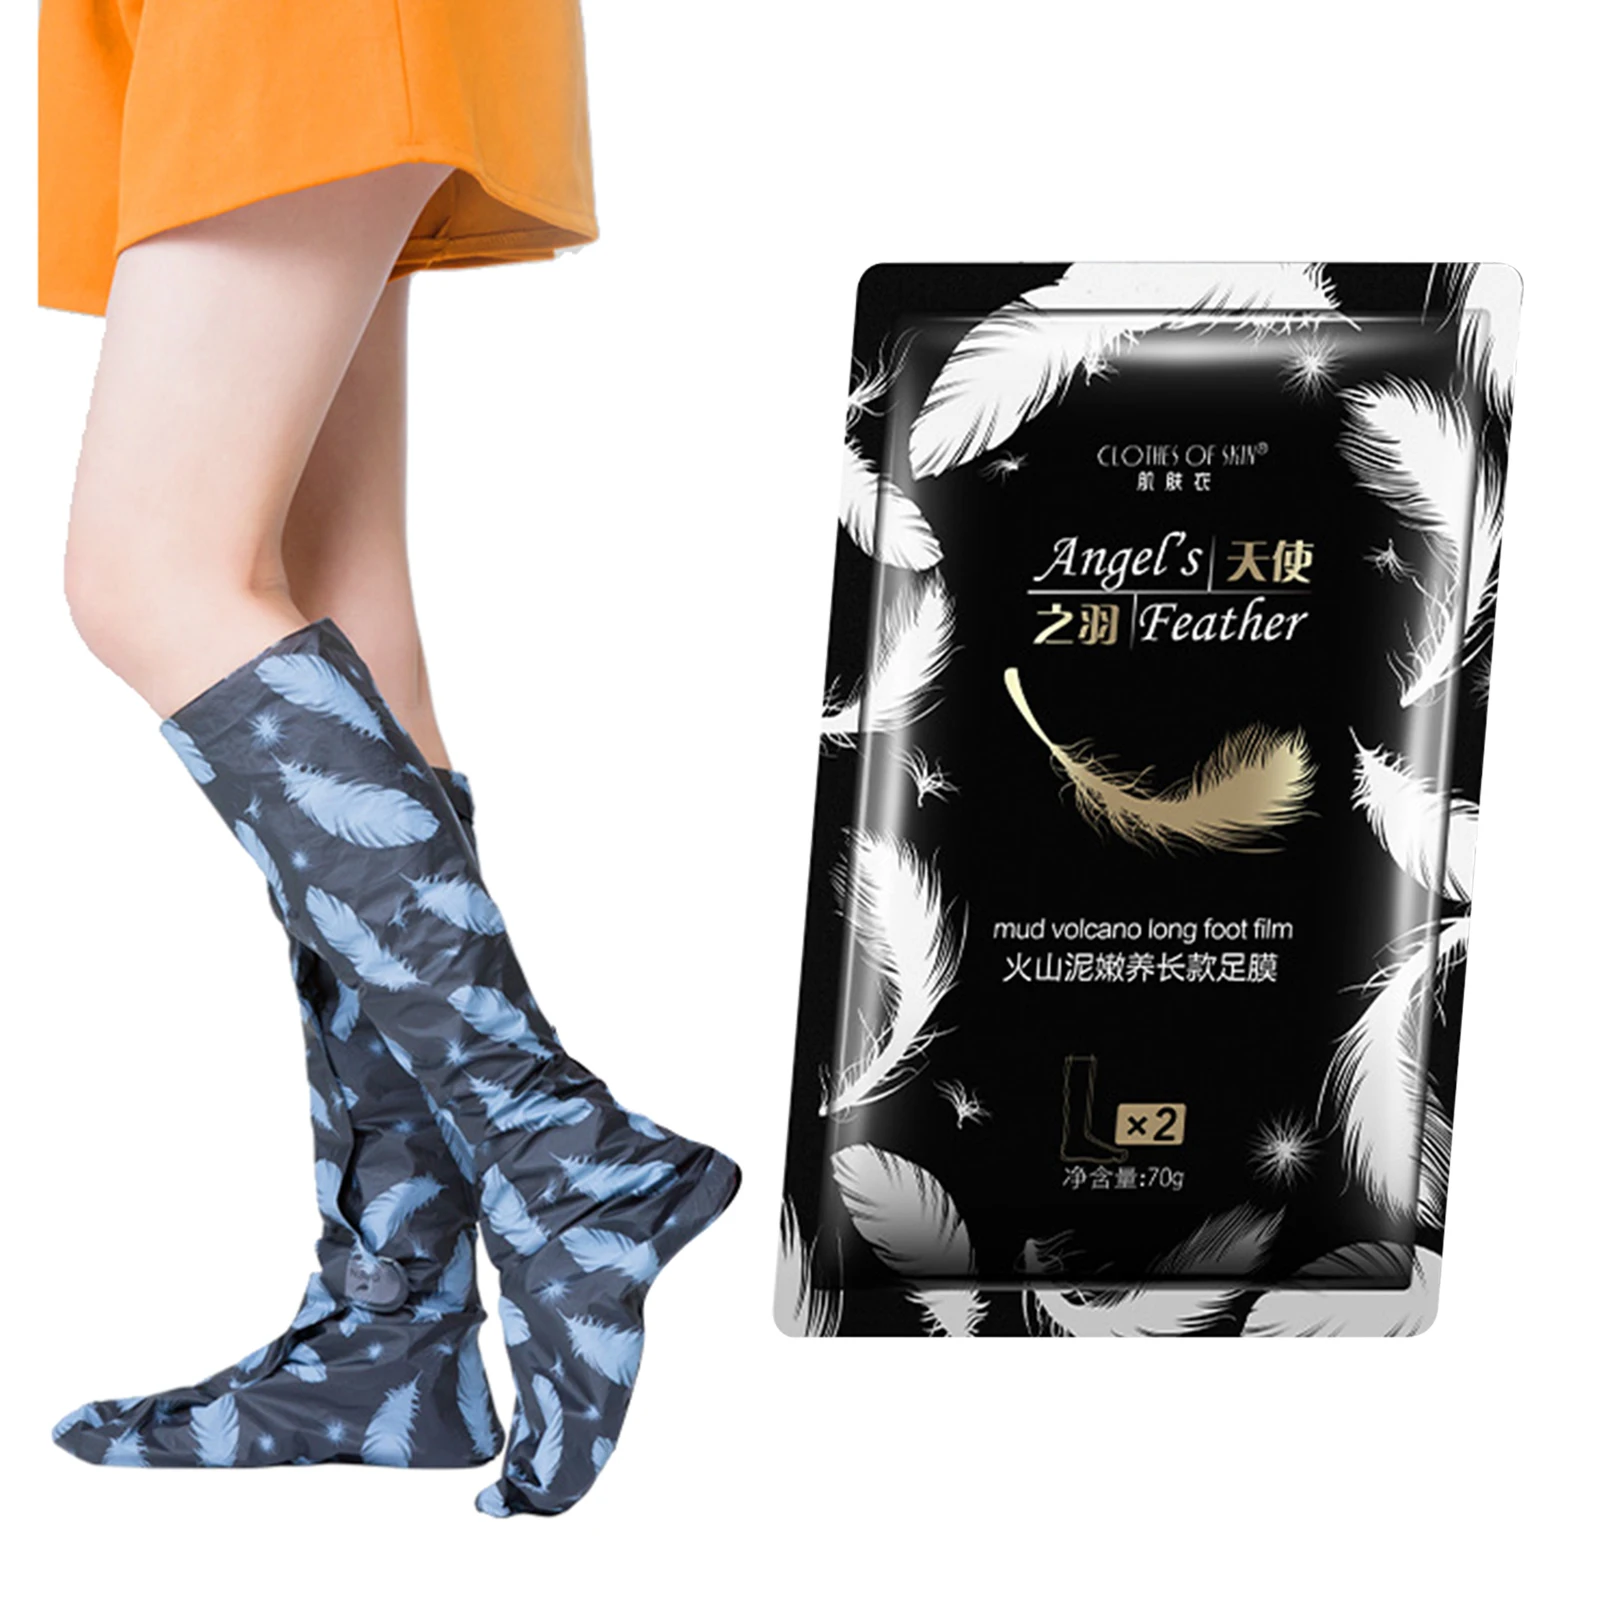 2x Exfoliating Foot Mask Peel Natural Moisturizing Peeling Remover for Dead Skin Foot Care Tool